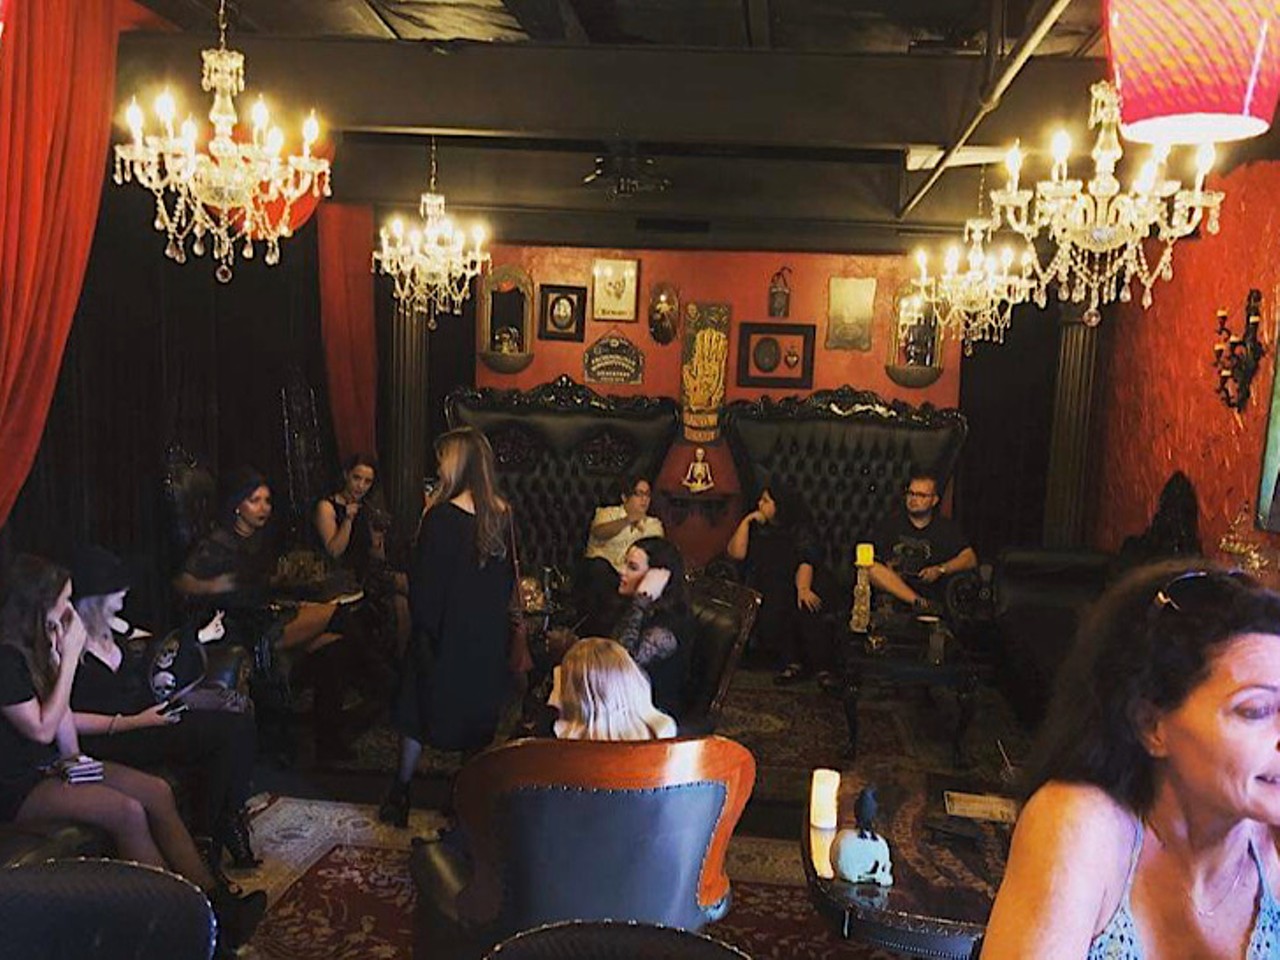 Spookeasy
1919 E 7th Ave, Tampa, FL
This hidden gem is the world's only haunted Kava Kava and botanical tea speakeasy lounge. The bar hosts &#148;spooky story nights&#148; on Tuesdays to keep Halloween going all year long 
Photo via Spookeasy/Facebook